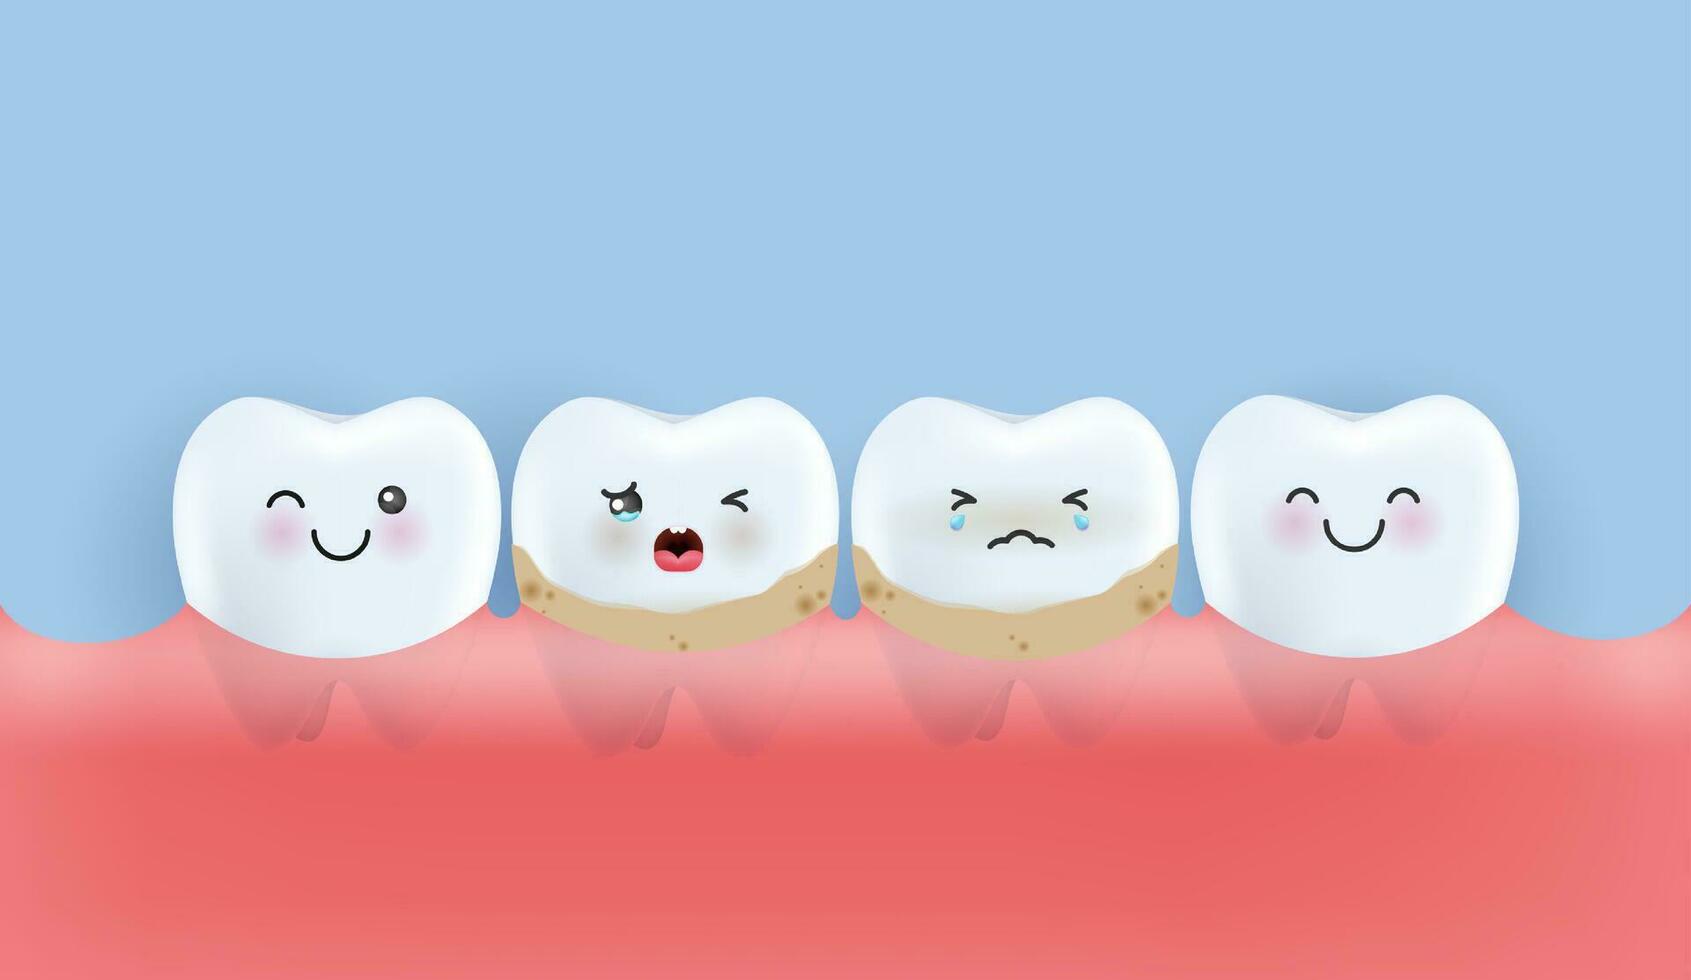 Teeth is treating big unhealthy teeth plaque, scaling, drilling plaque and caries teeth. teeth character for kids. cute dentist mascot for medical apps, websites and hospital. vector design.